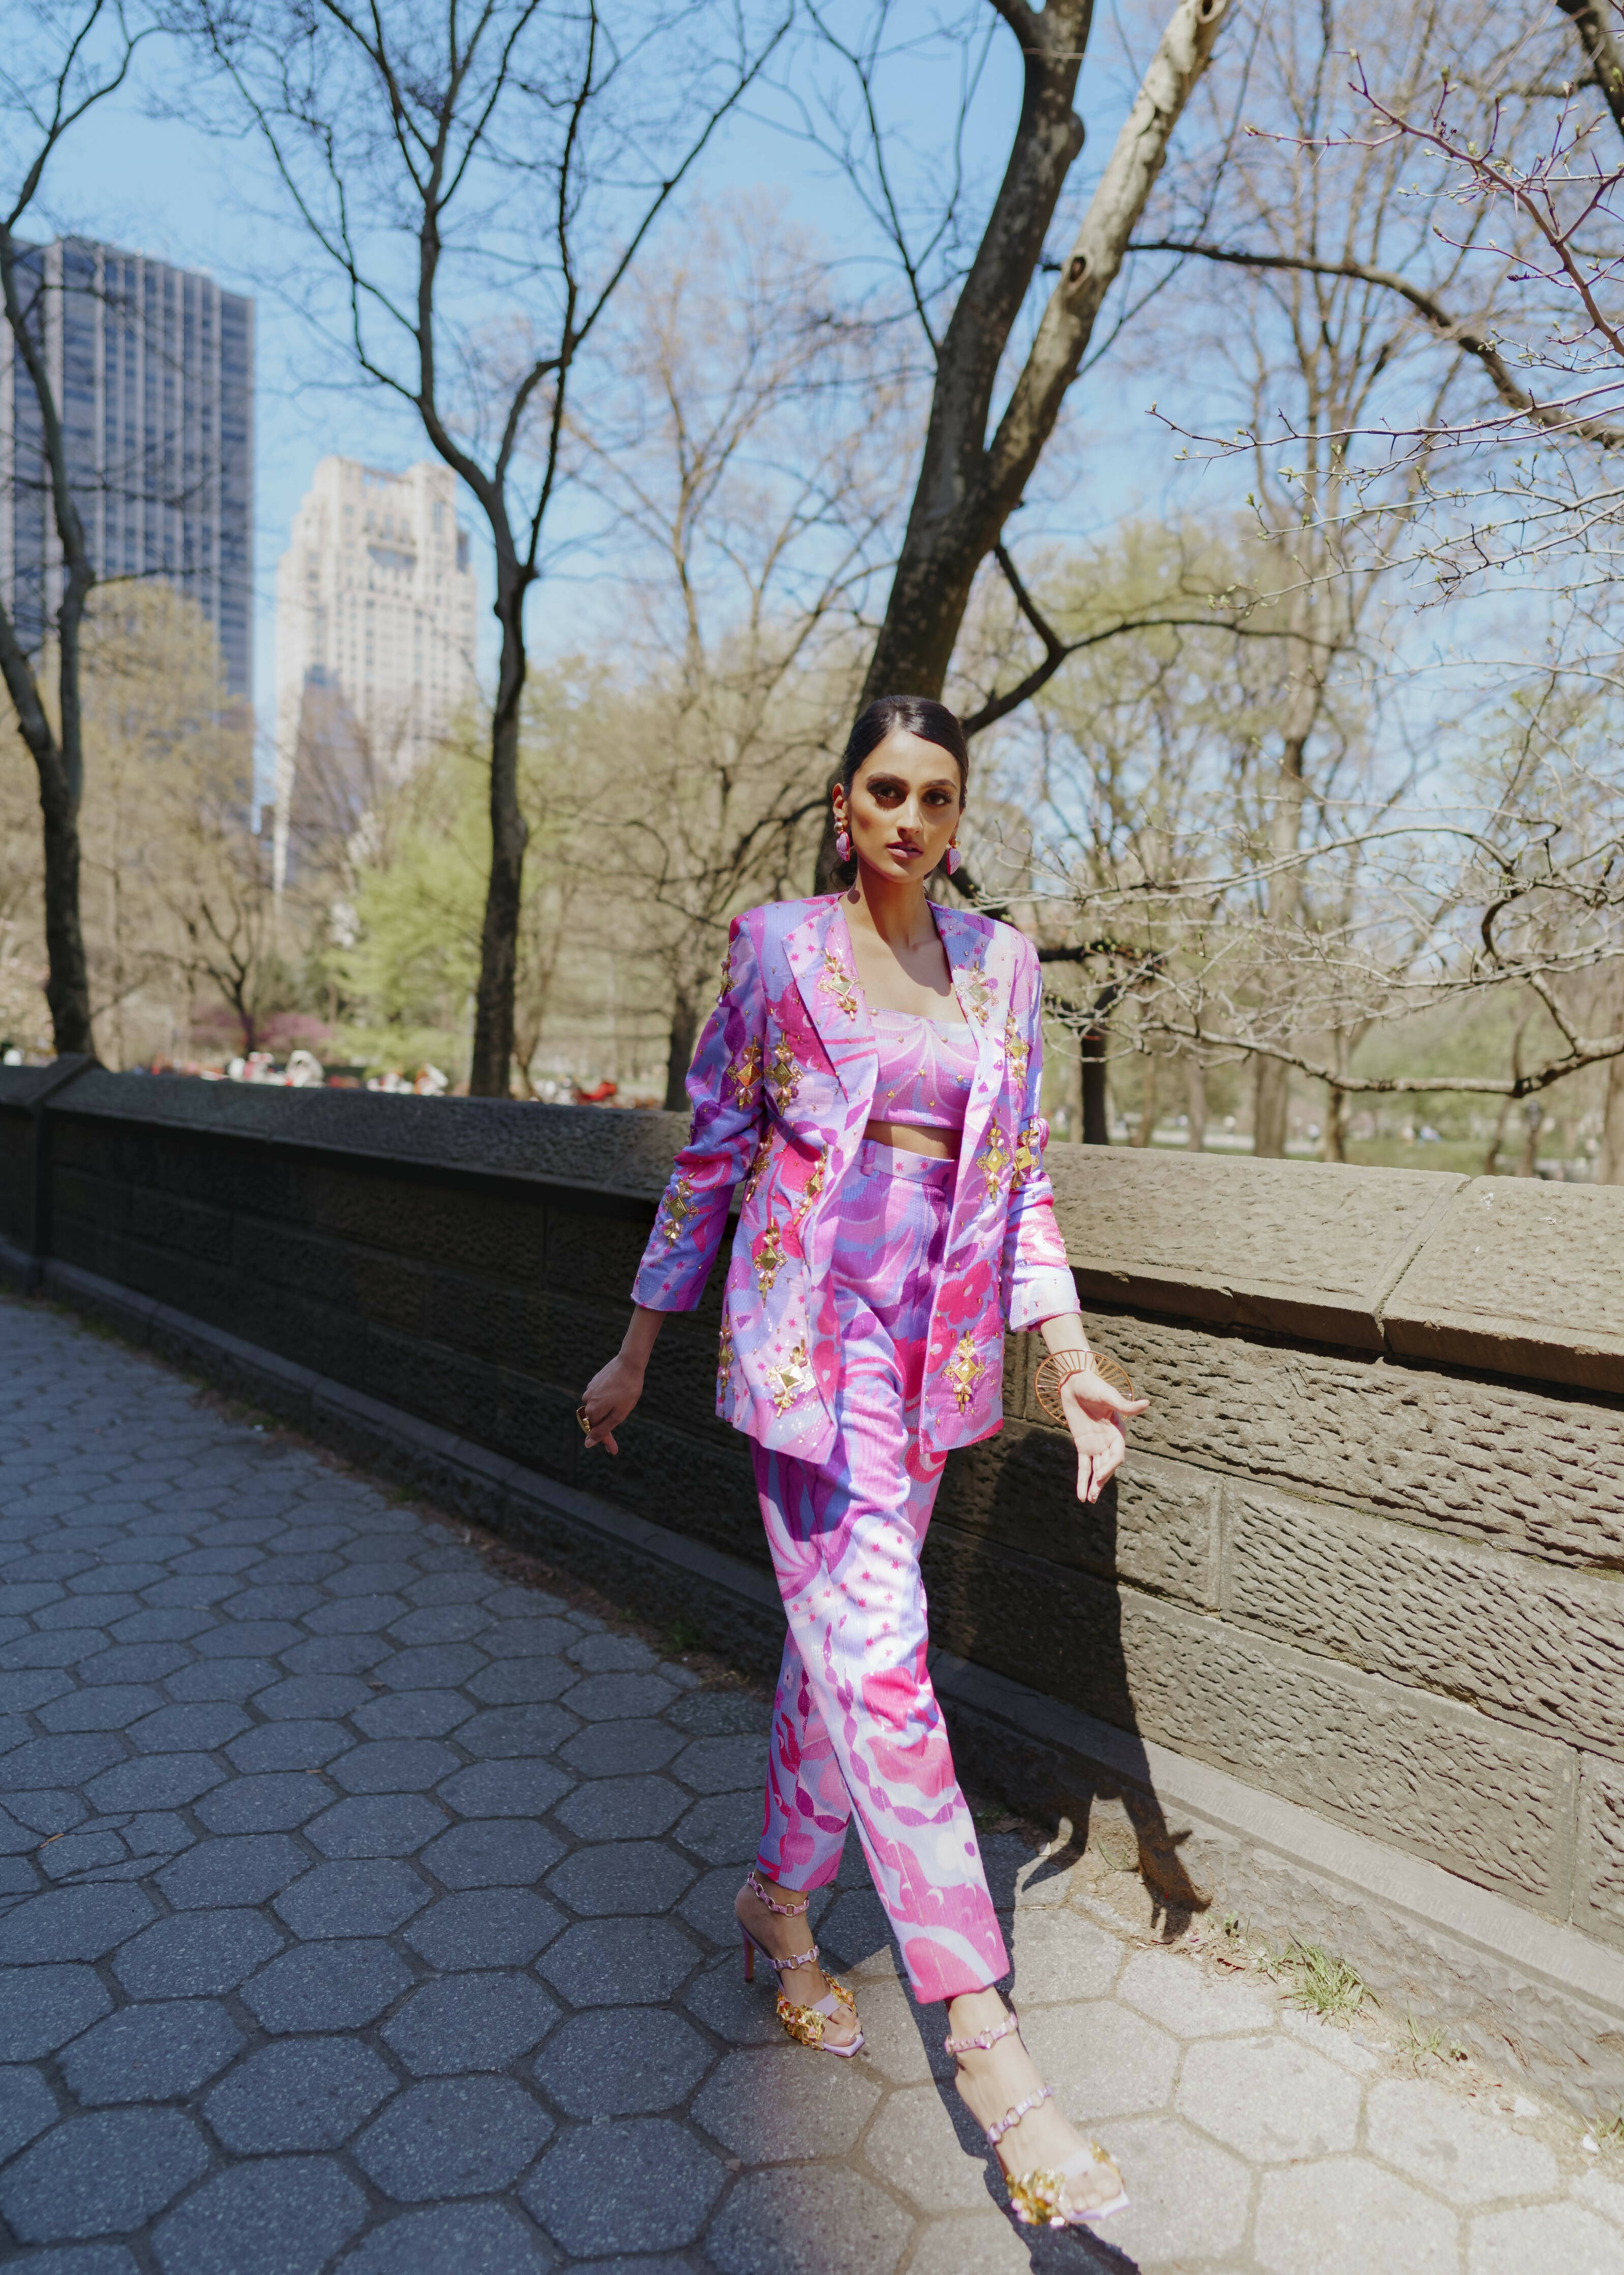 Living Coral: Lilac and Hot Pink Sequin Printed Pant Suit Set